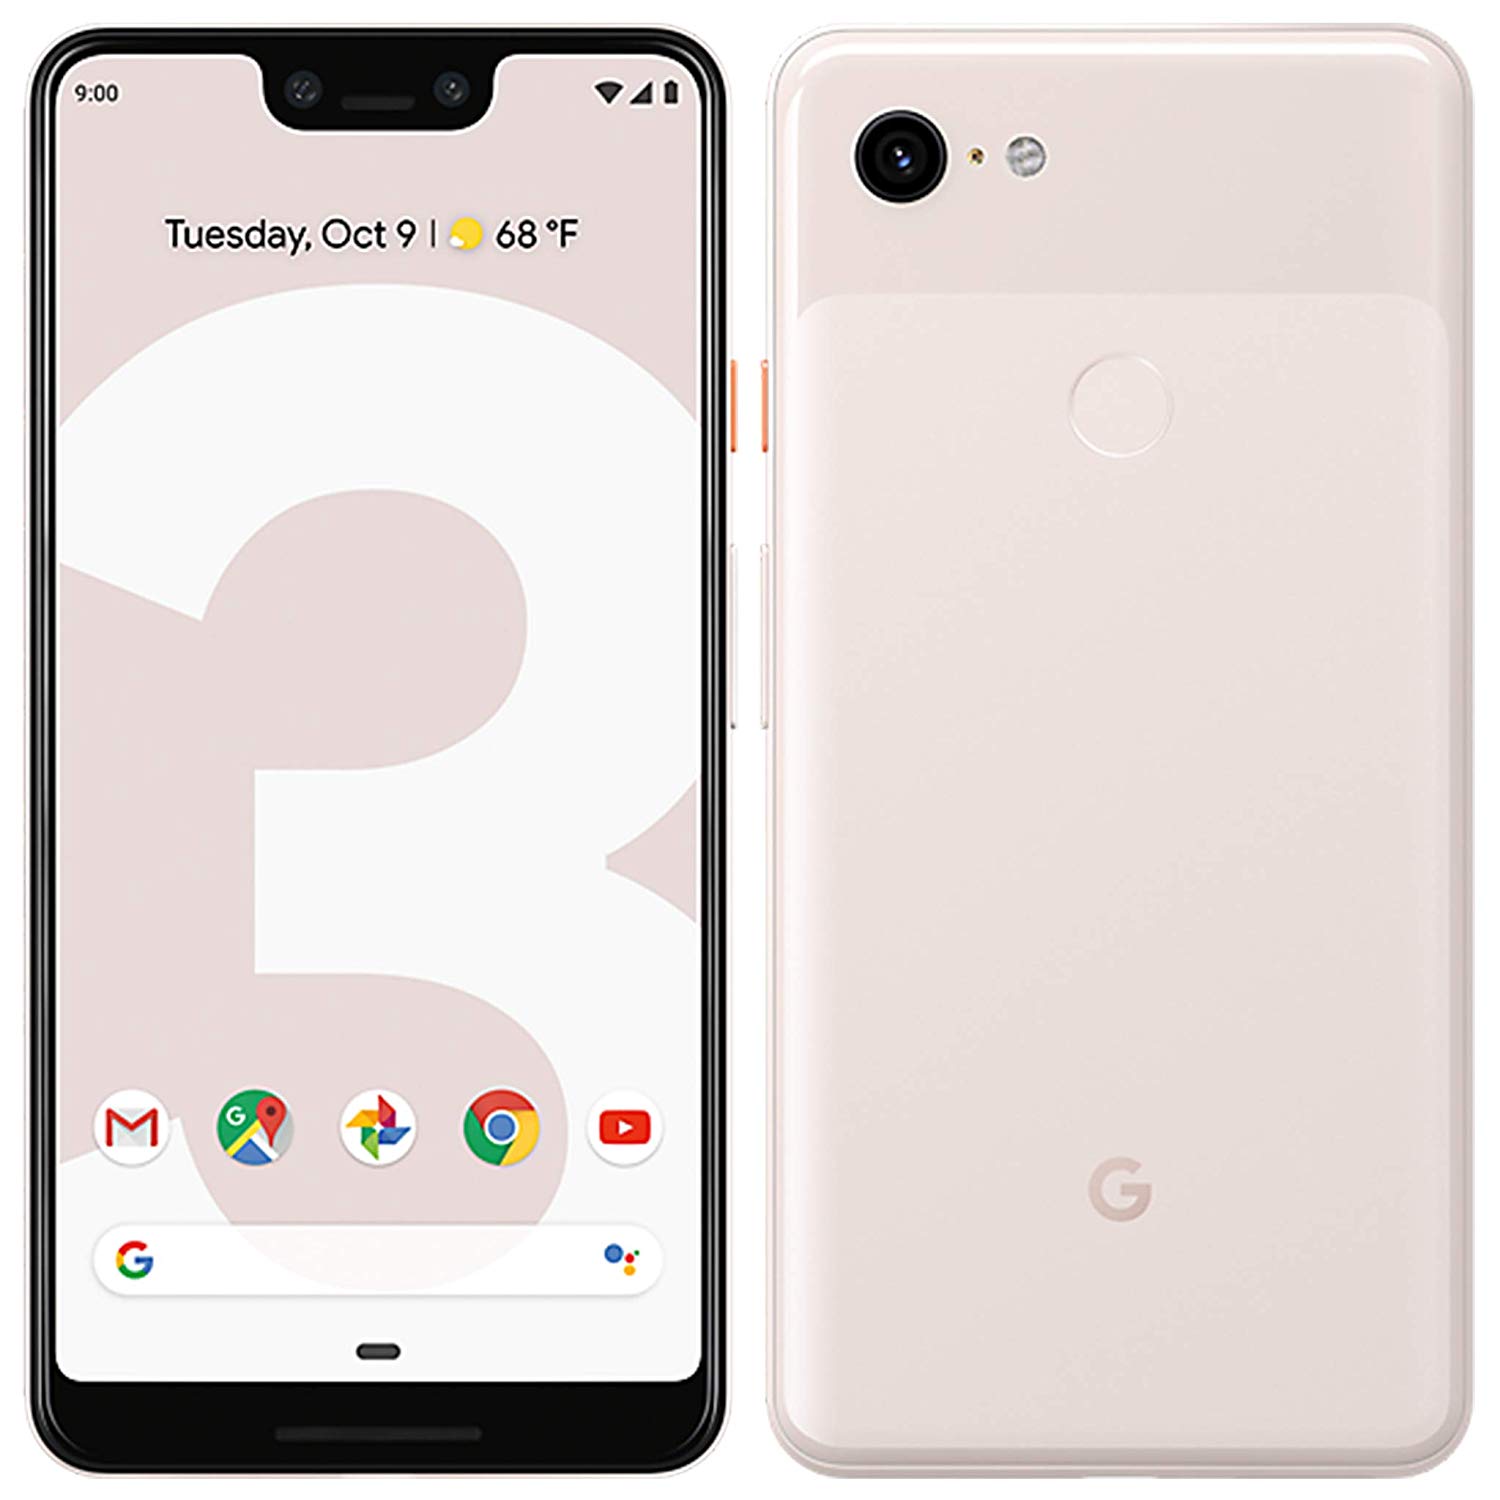 Google Pixel 3XL 64GB Pink (Unlocked) Excellent Condition - image 1 of 4